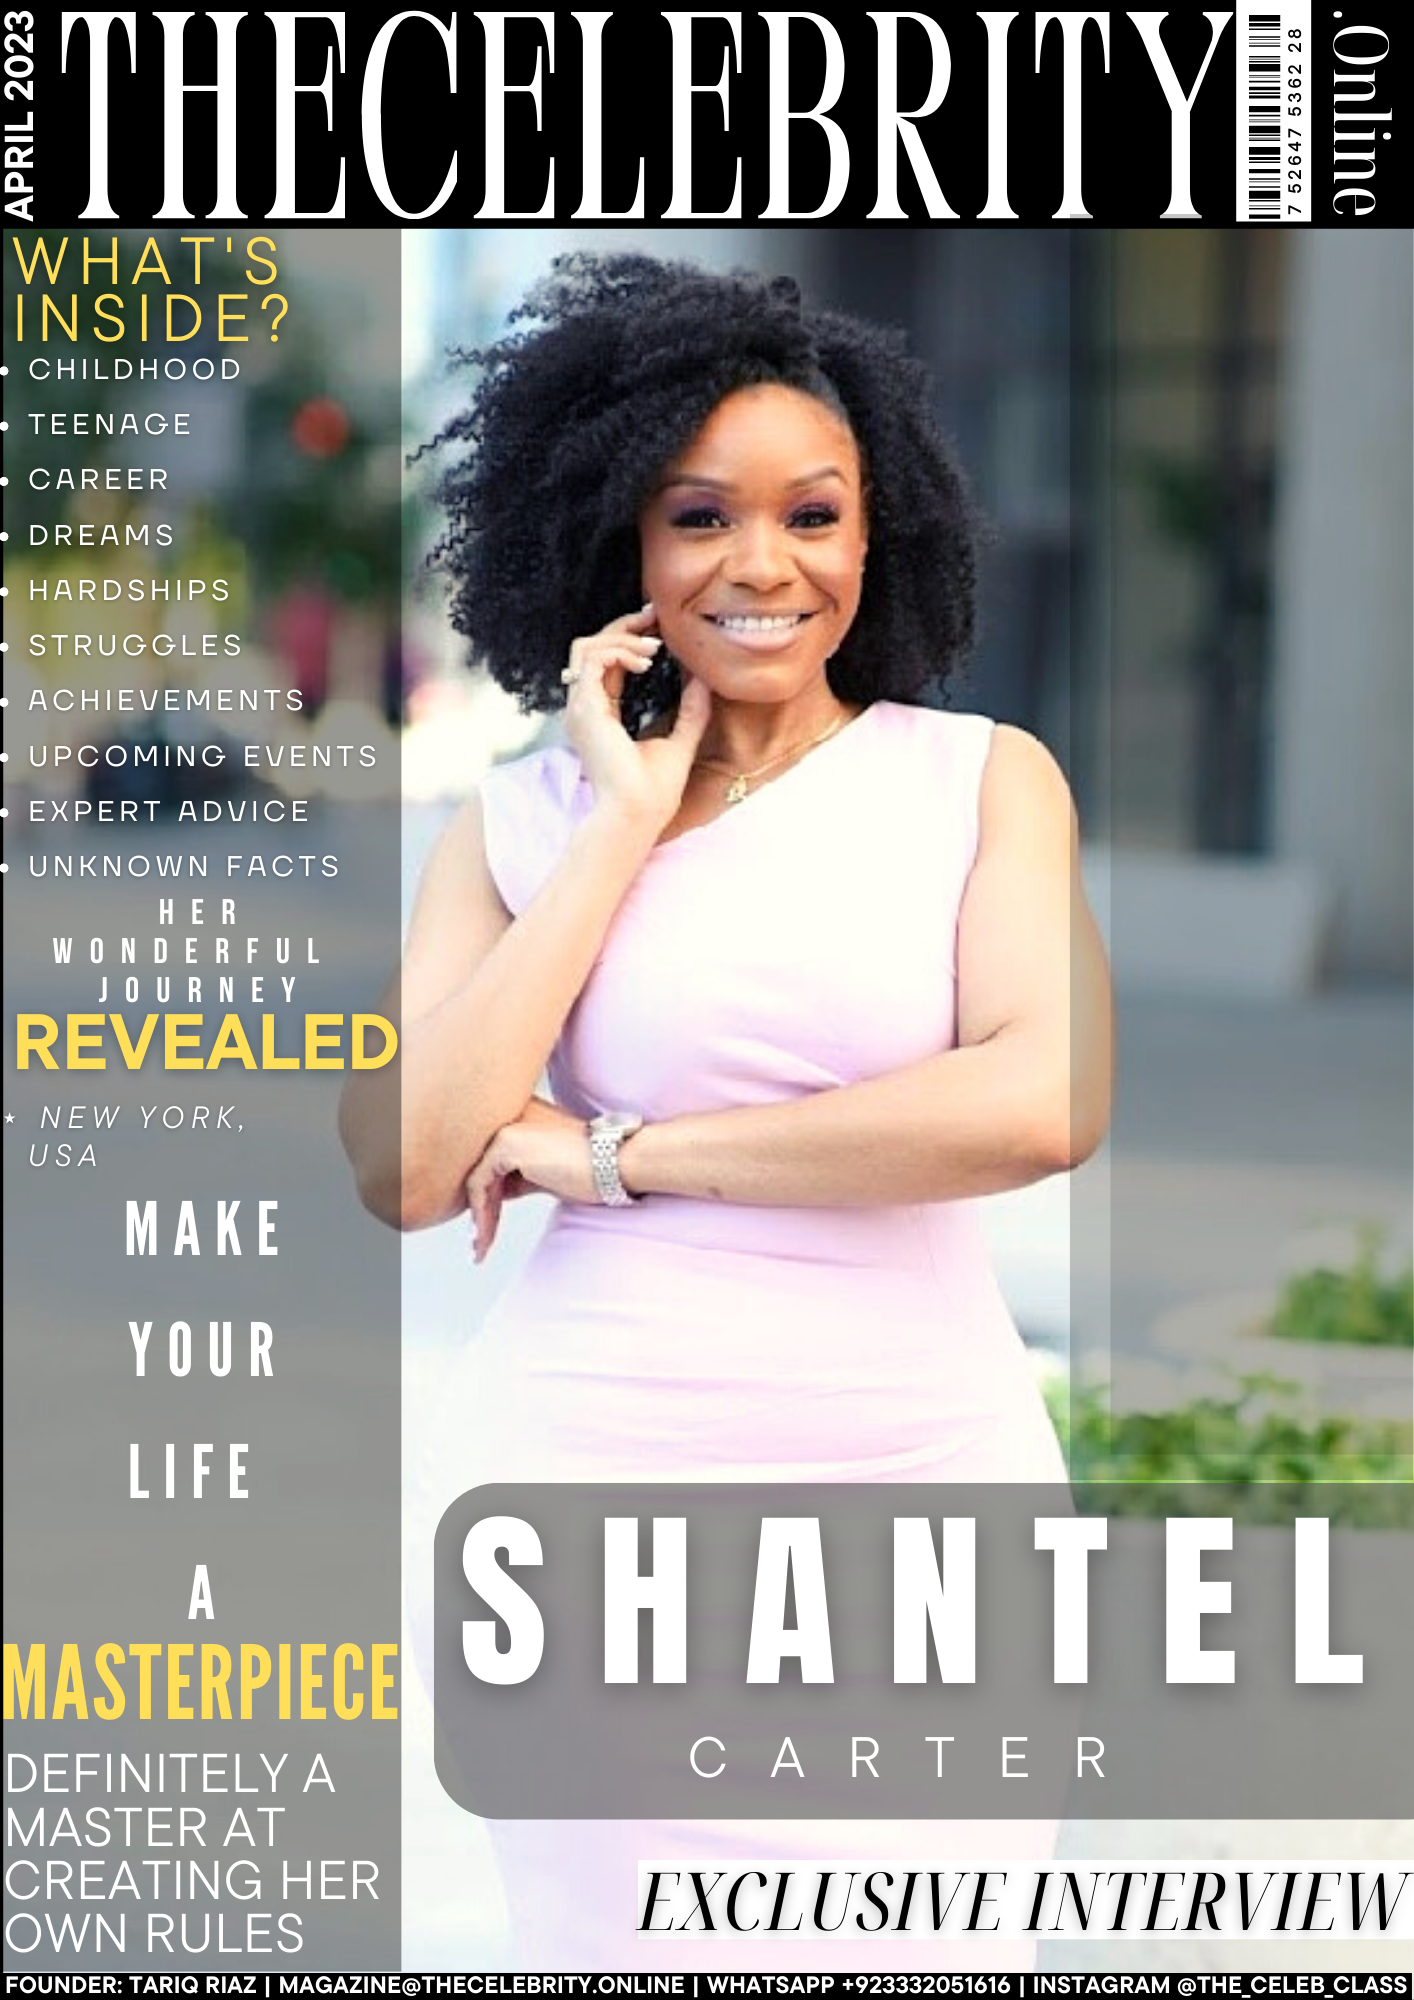 Shantel Carter Exclusive Interview -I strongly believe in being a student FIRST’